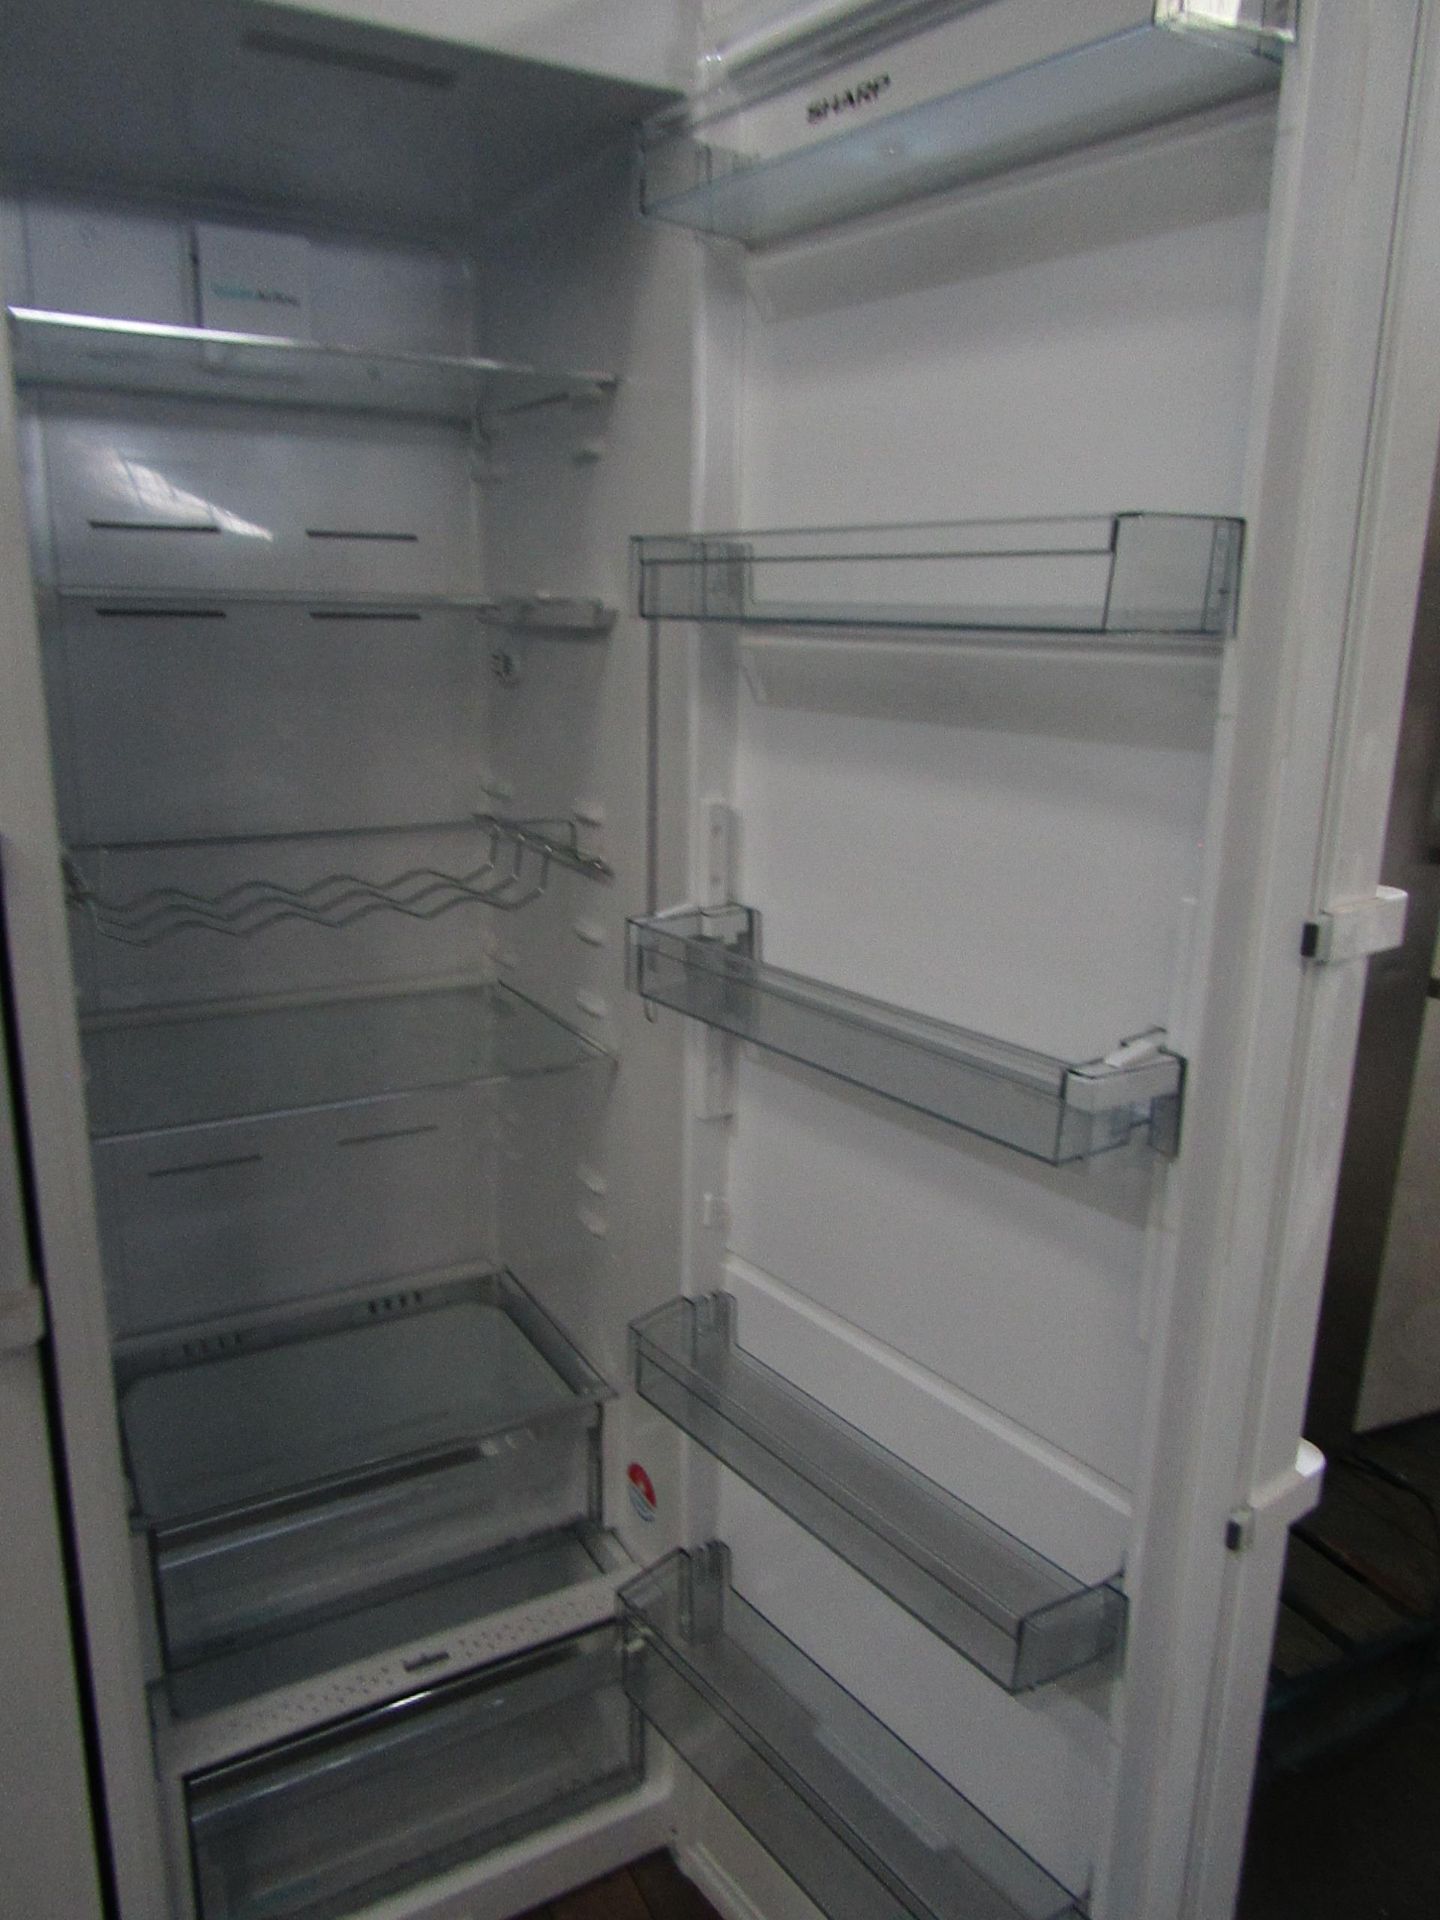 Sharp - Tall White Freestanding fridge - Unable To Test Due To Damaged Plug. - Image 2 of 2